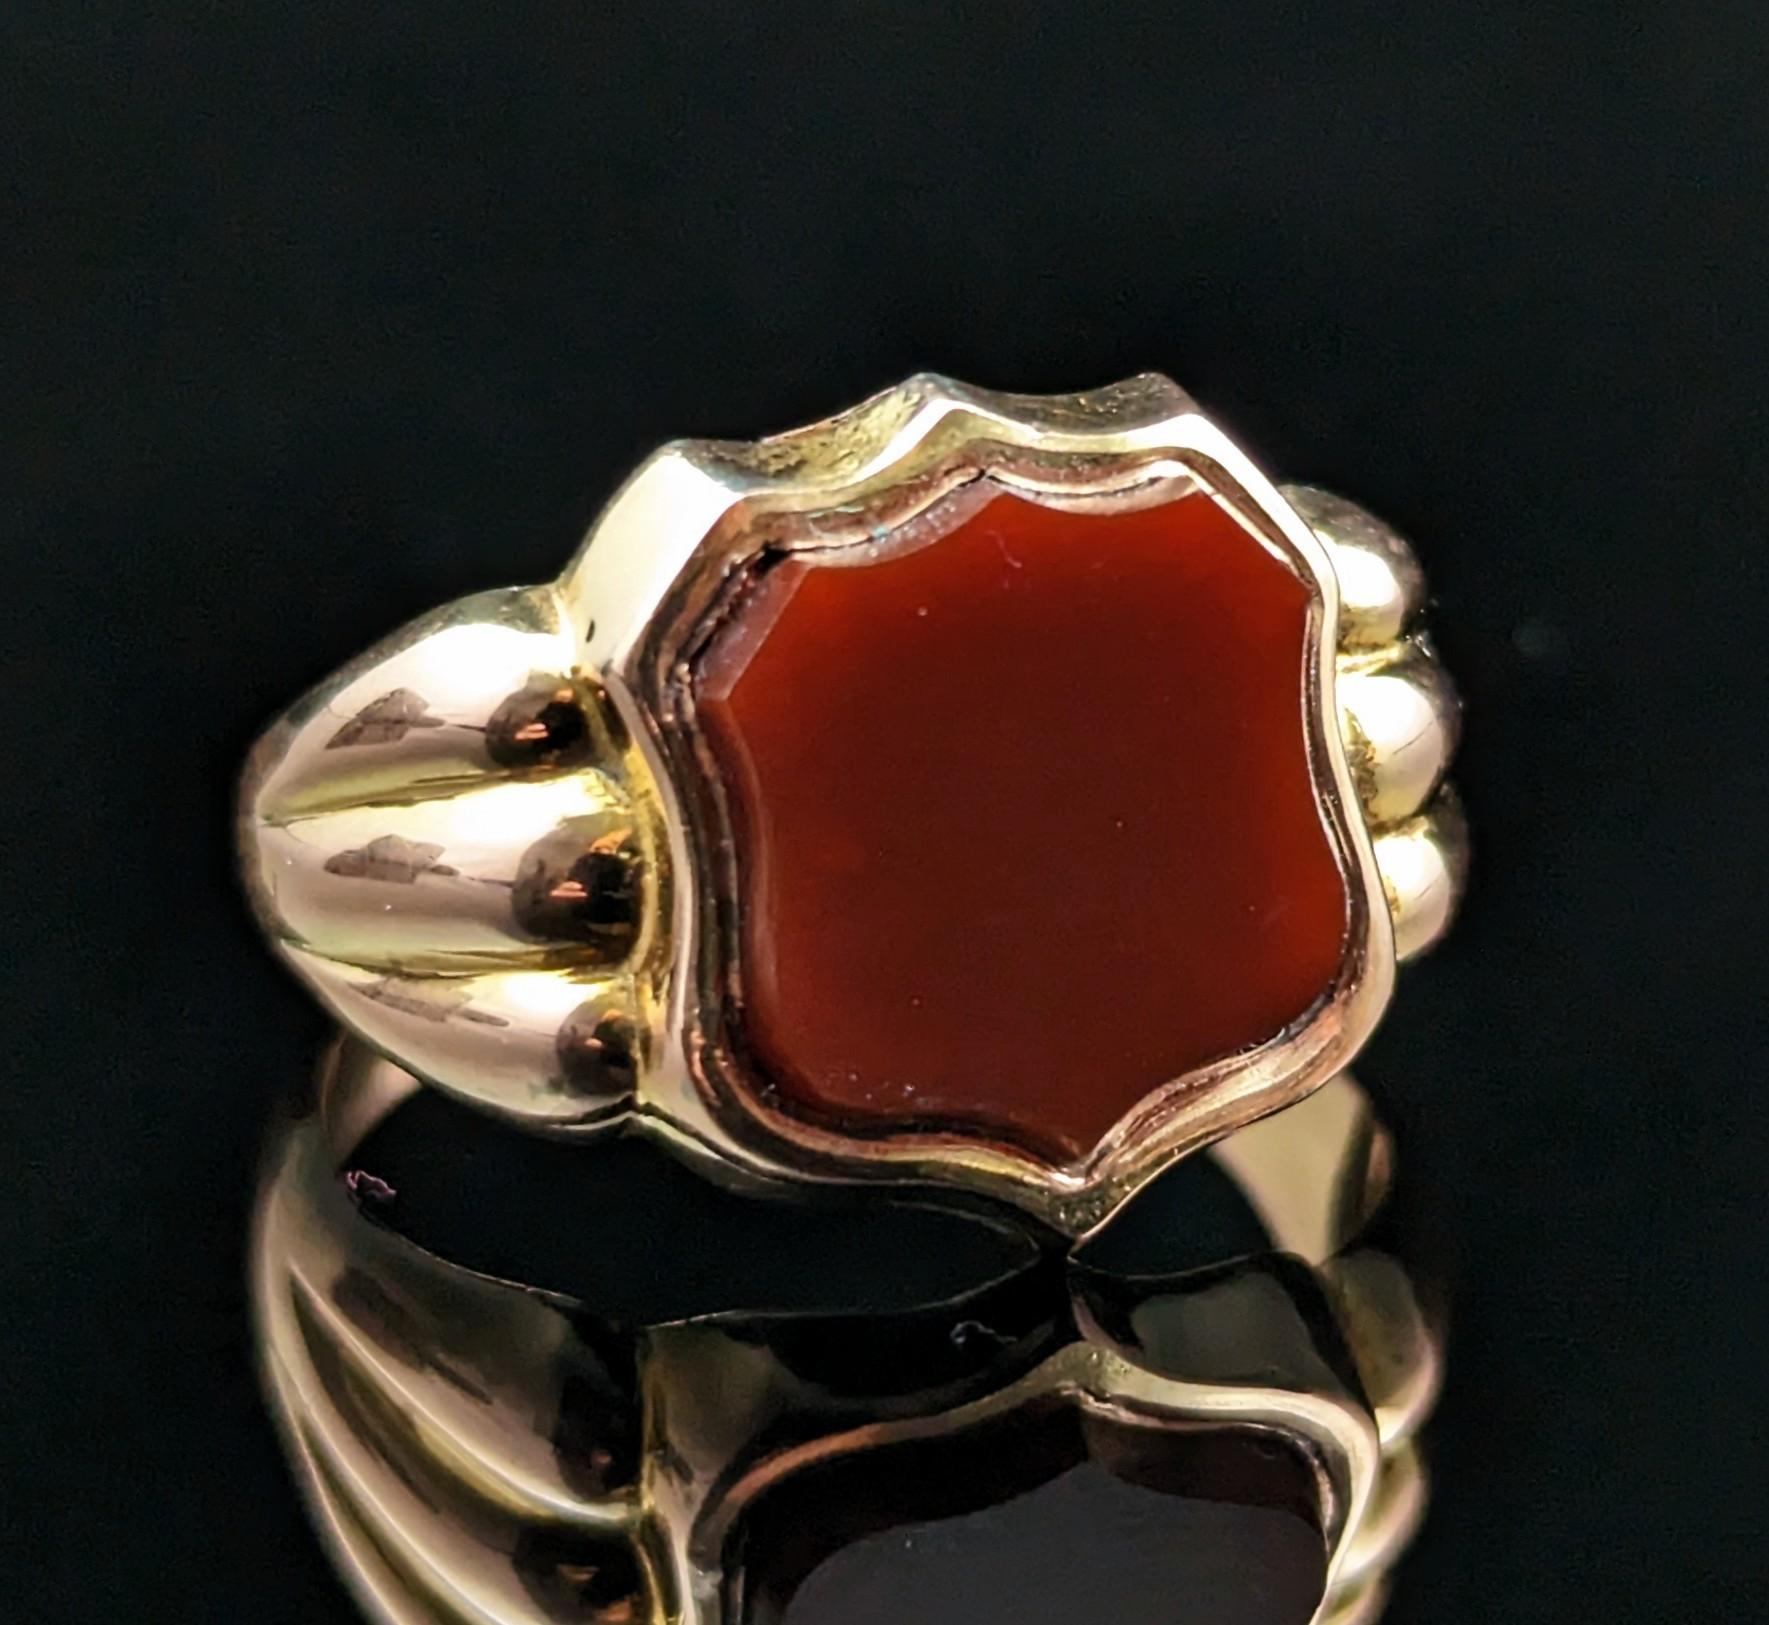 This impeccable antique, Edwardian era
9kt gold and Carnelian signet ring has everything you could wish for in a signet ring!

It has a shield shaped face set with a rich orangey red Carnelian stone, this has not been carved so could be personalised